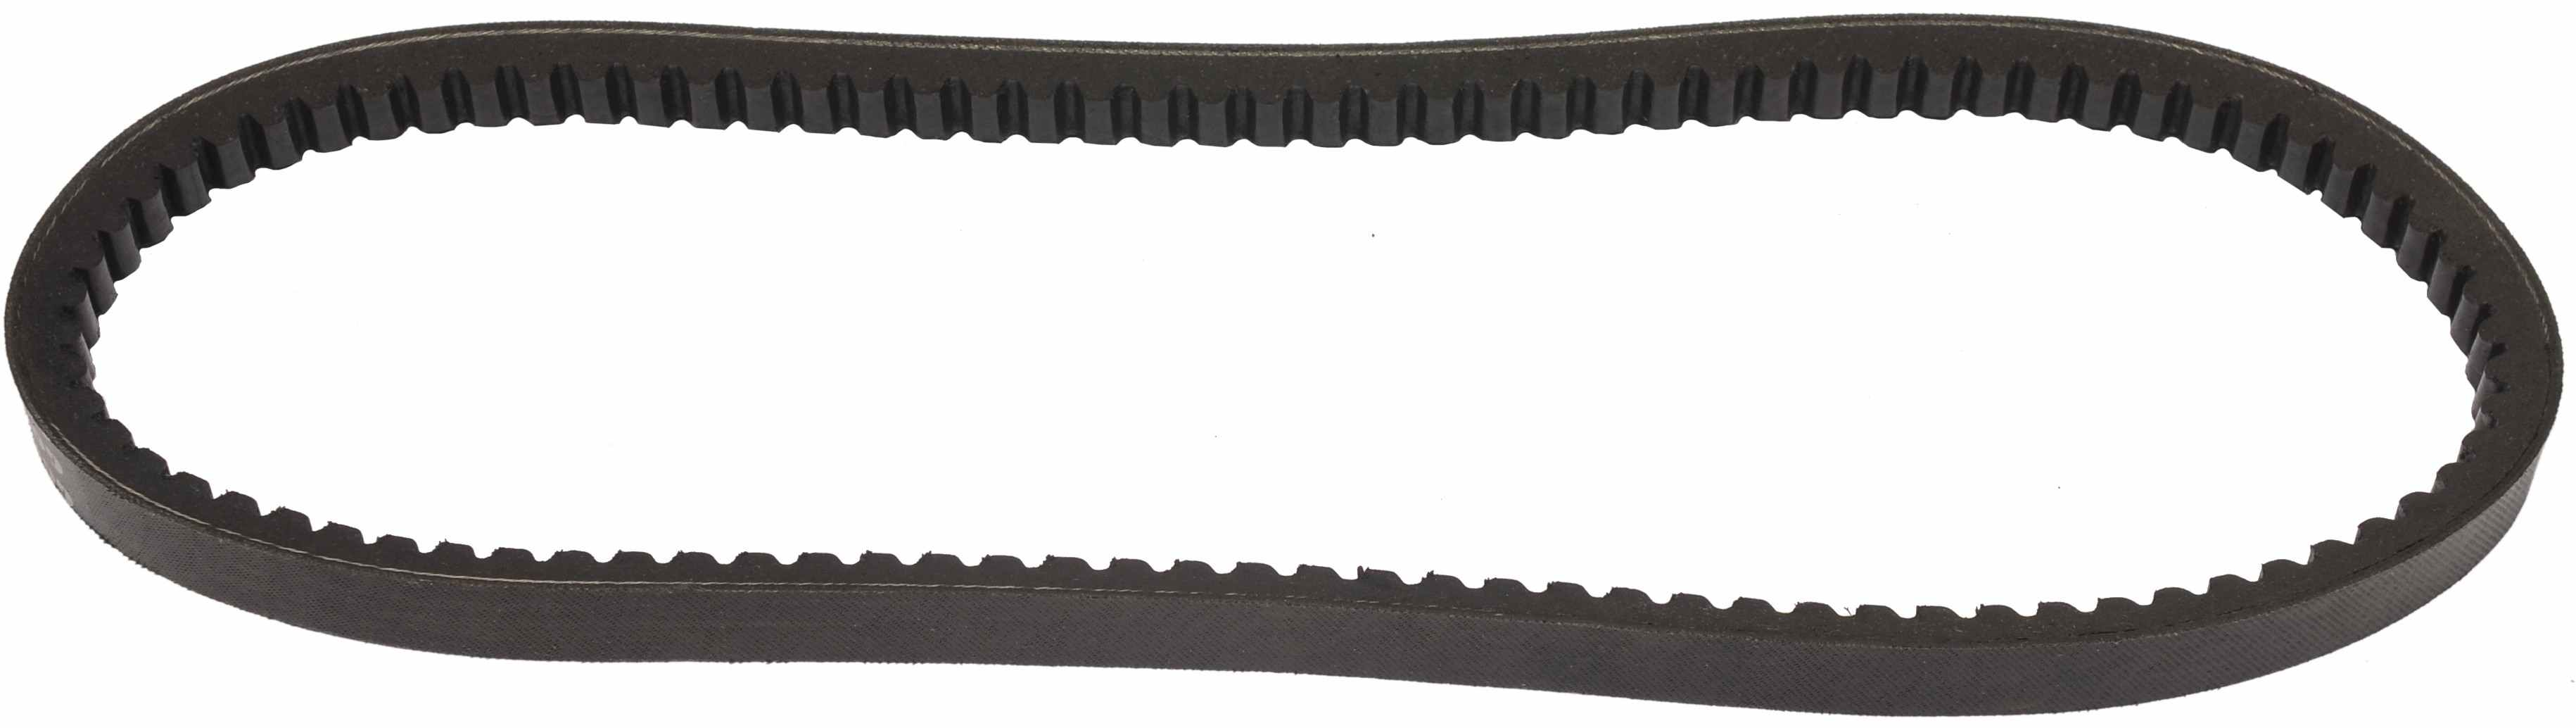 Continental Accessory Drive Belt  top view frsport 22624